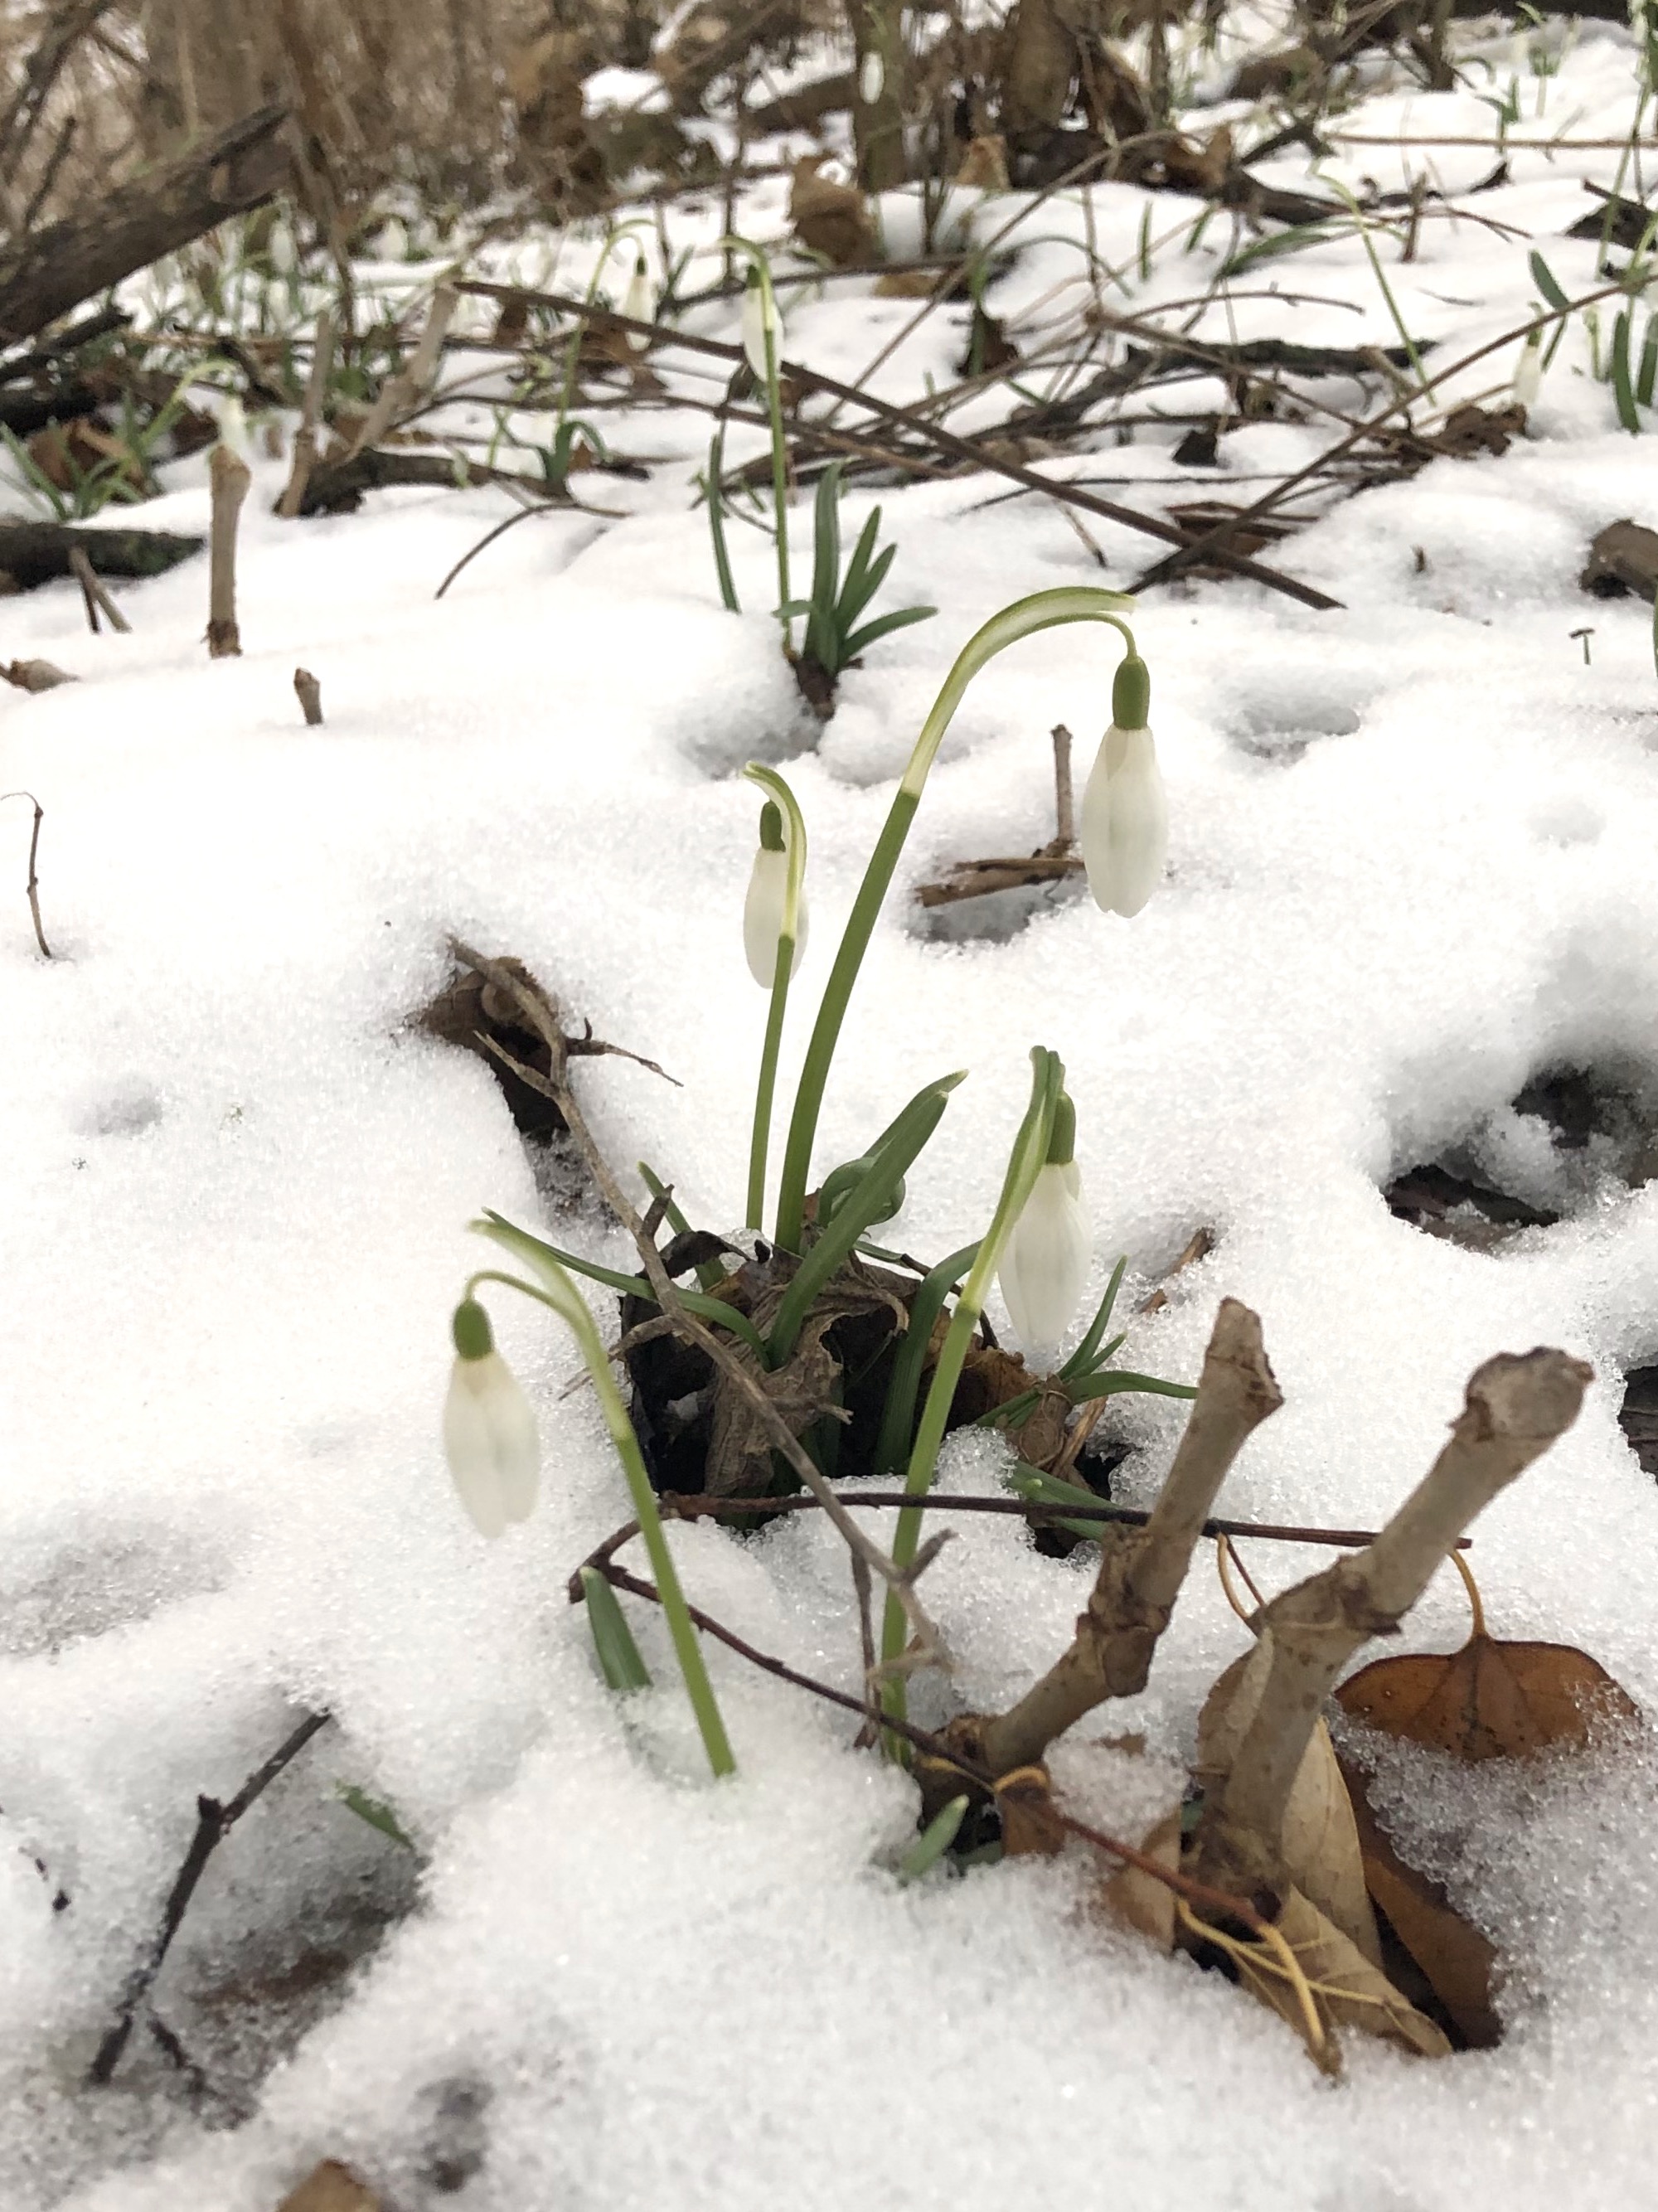 Snowdrops emerging in Madison Wisconsin along Arbor Drive on March1 17, 2021.